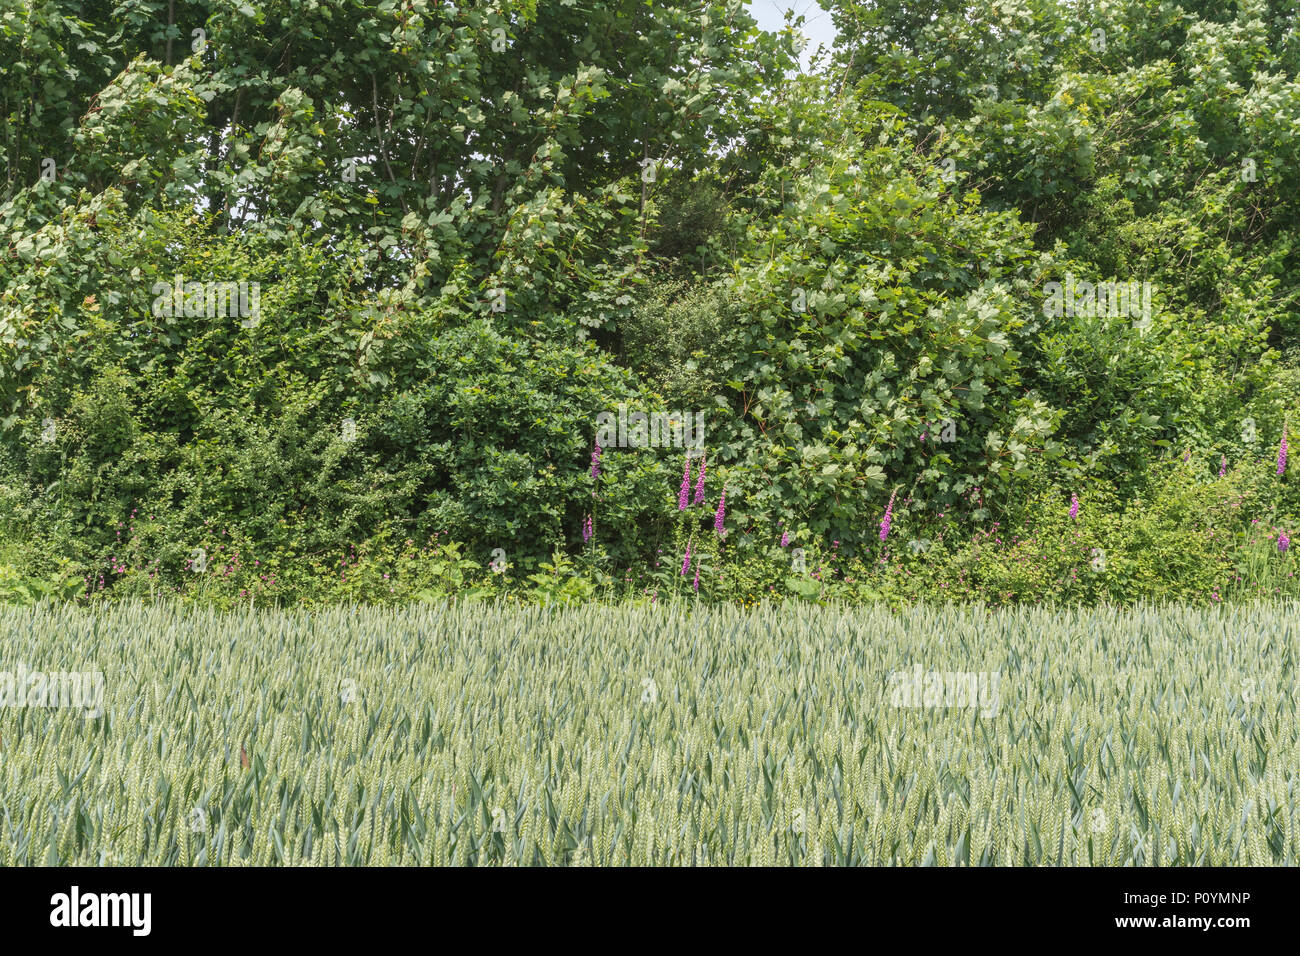 Wheat / Triticum crop growing in front of a natural hedgerow with  Foxglove / Digitalis purpurea growing in the background. Food growing in the field. Stock Photo